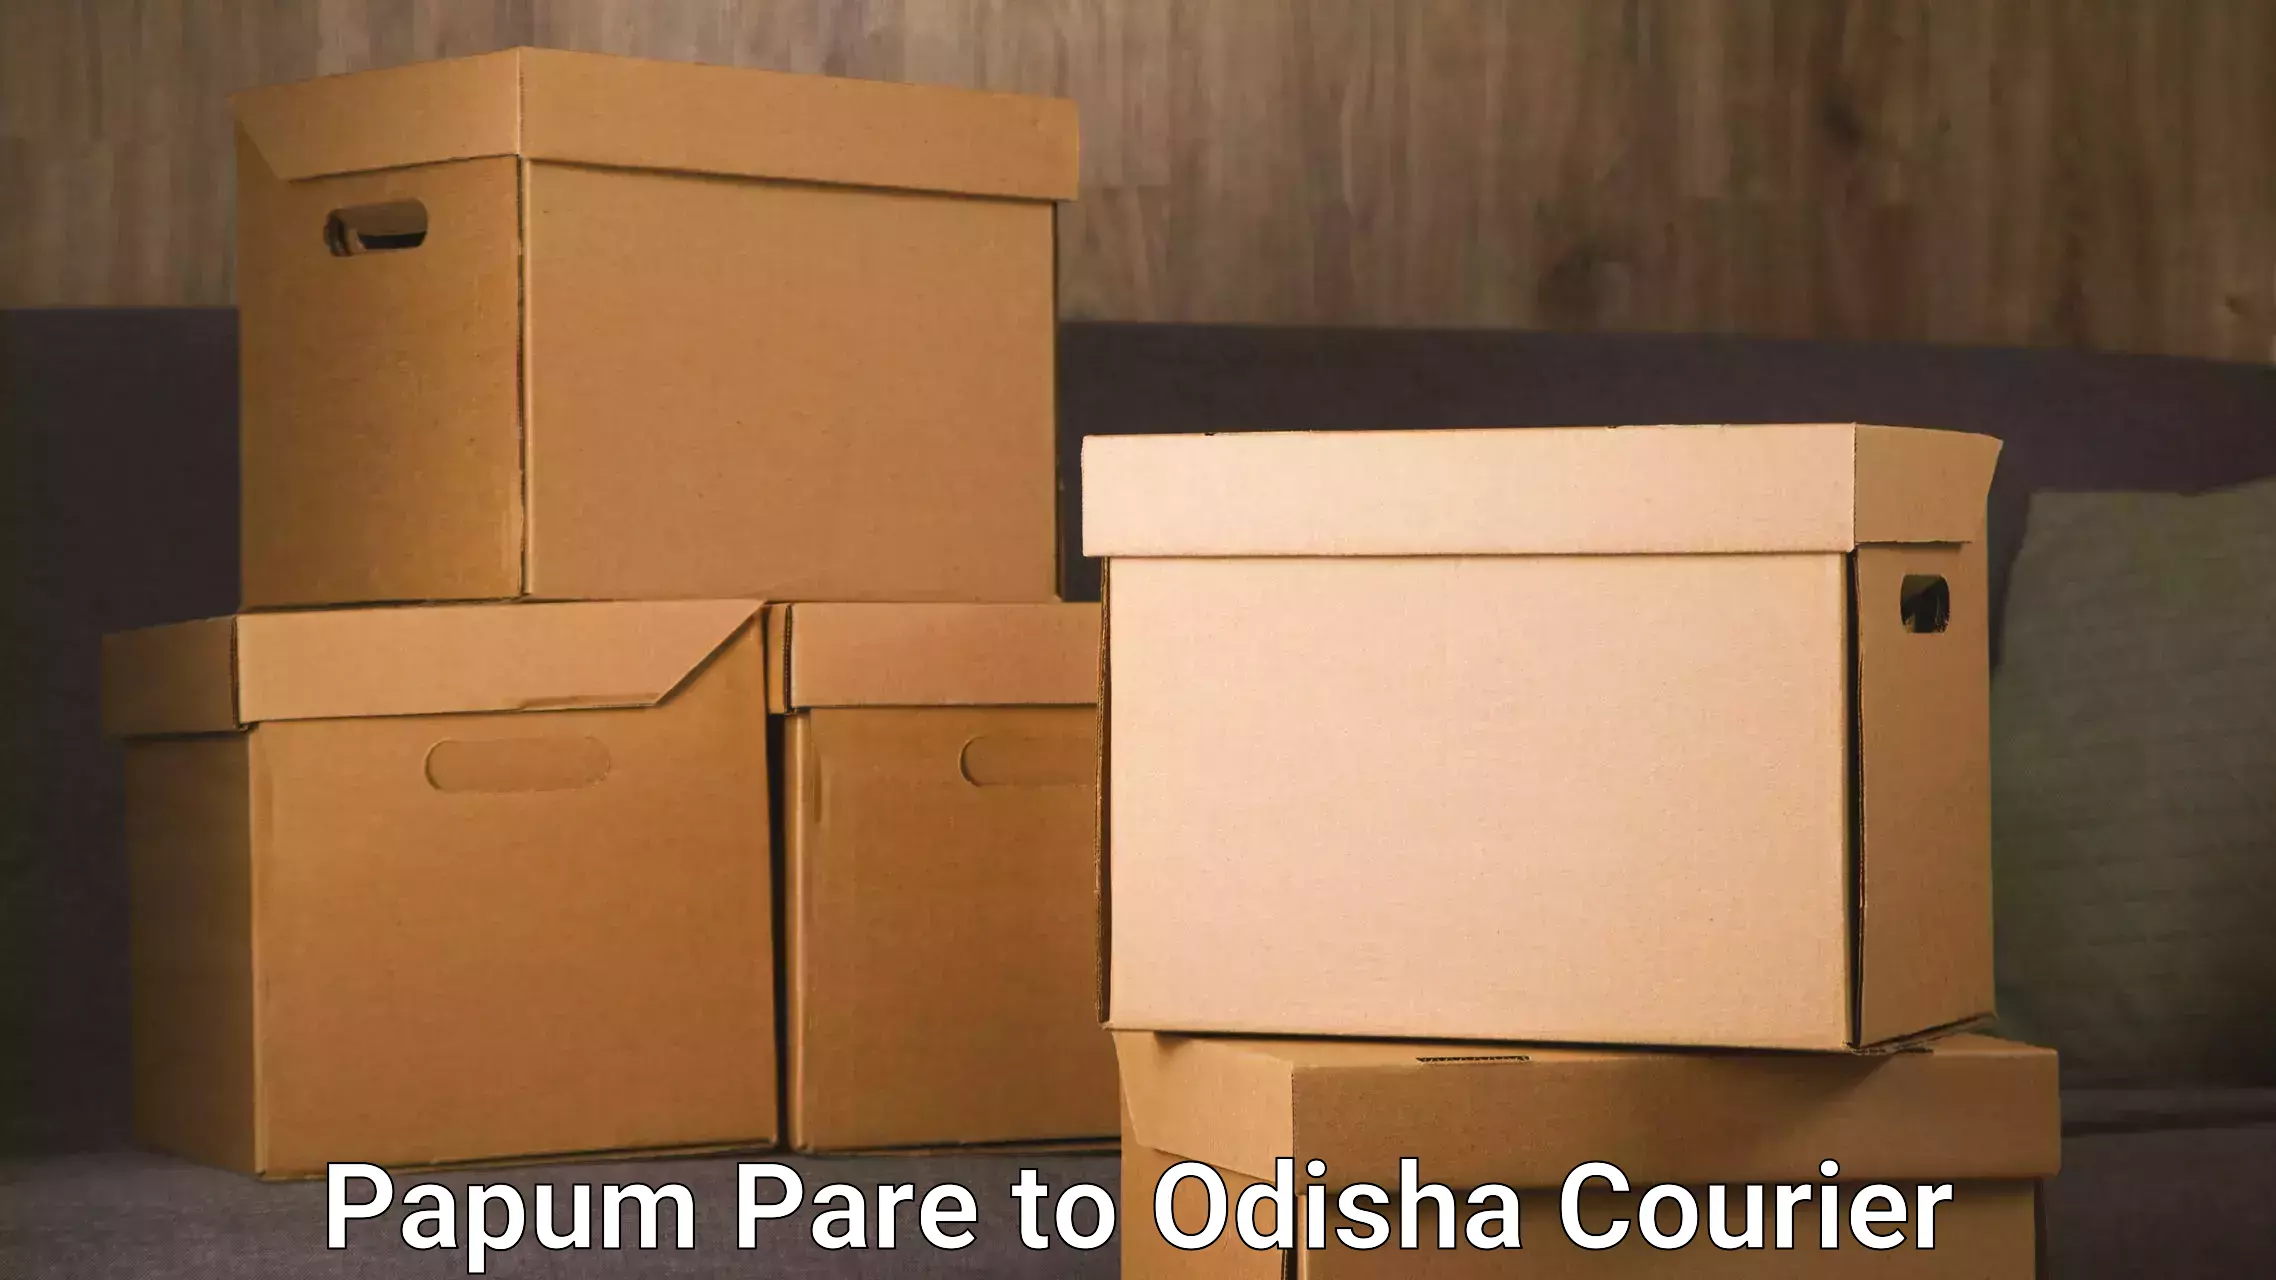 Reliable courier services in Papum Pare to Odisha